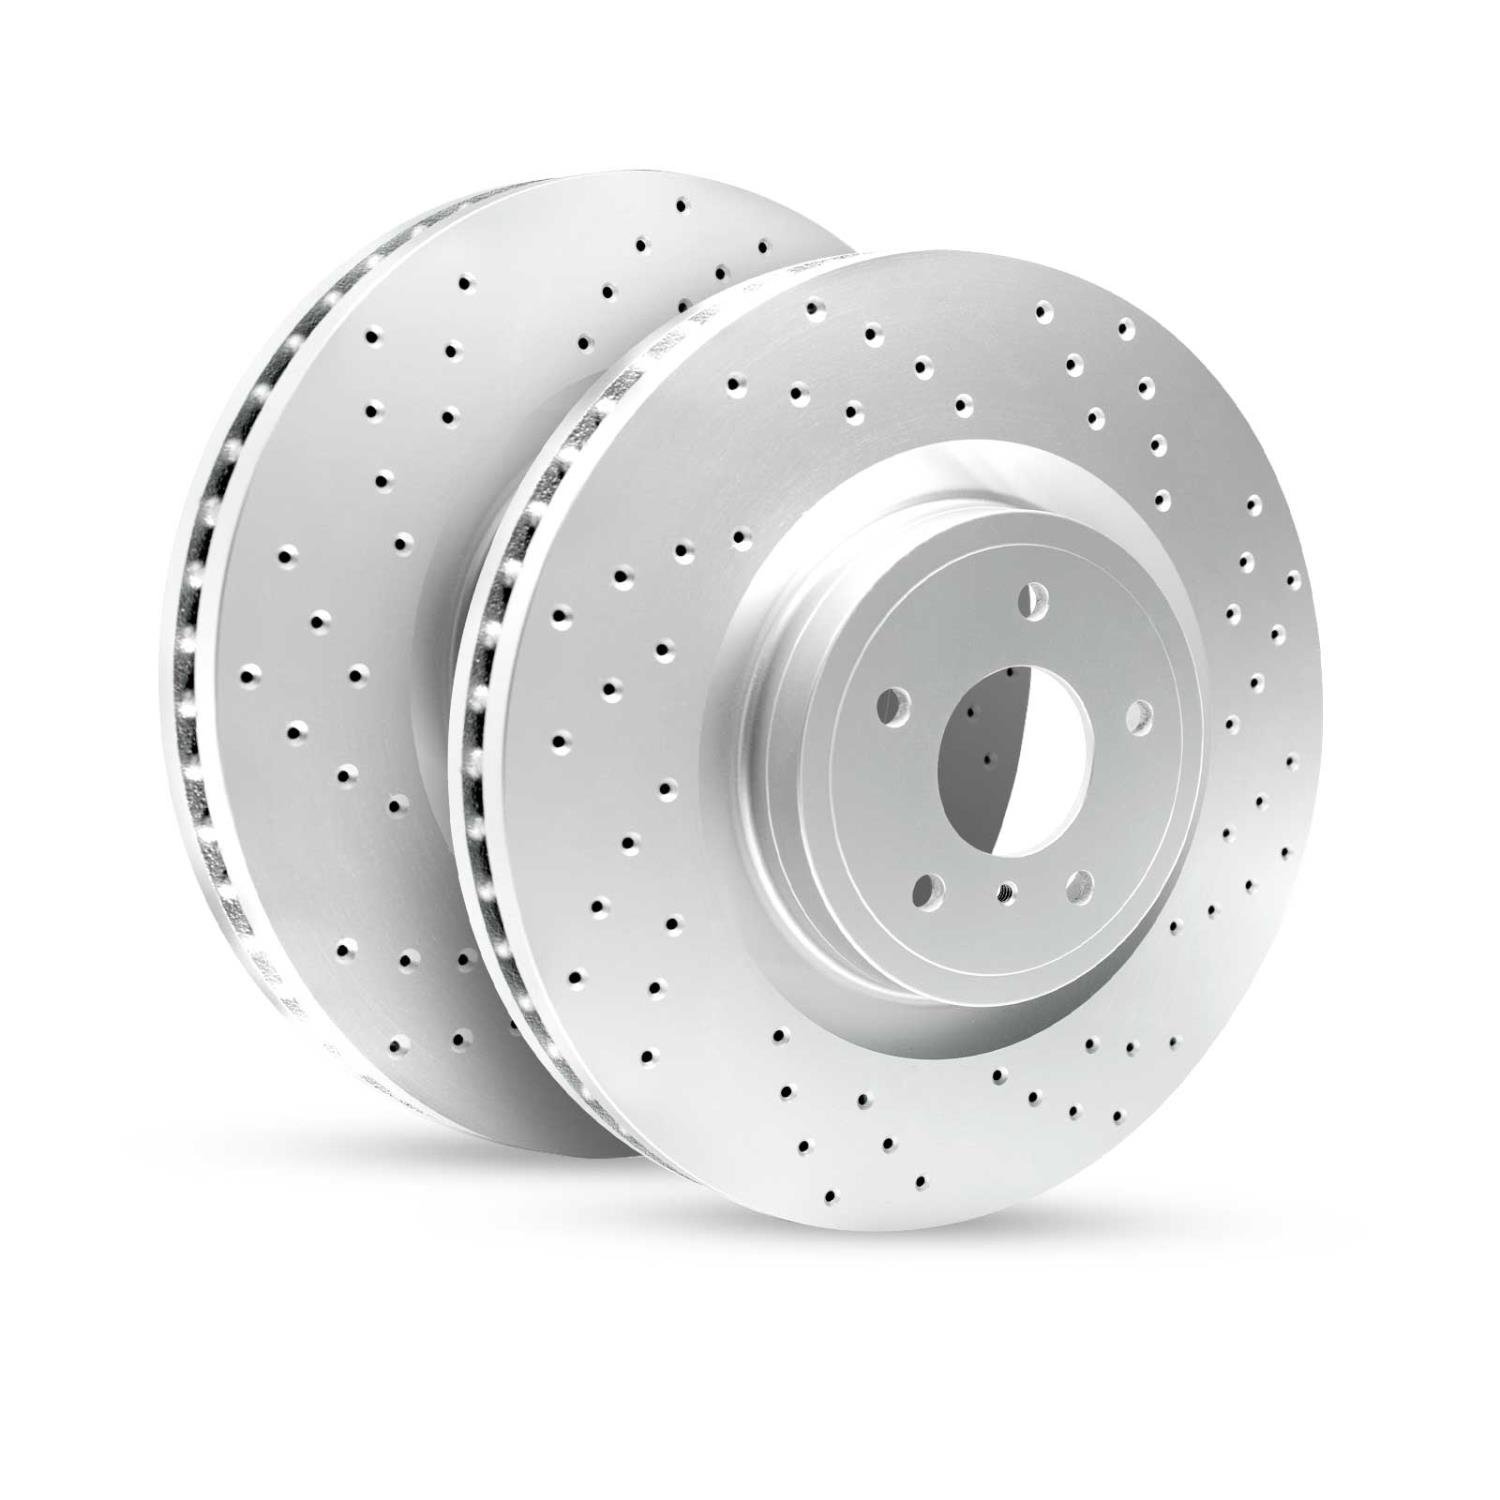 GEO-Carbon Drilled/Slotted Rotors, 2009-2015 Fits Multiple